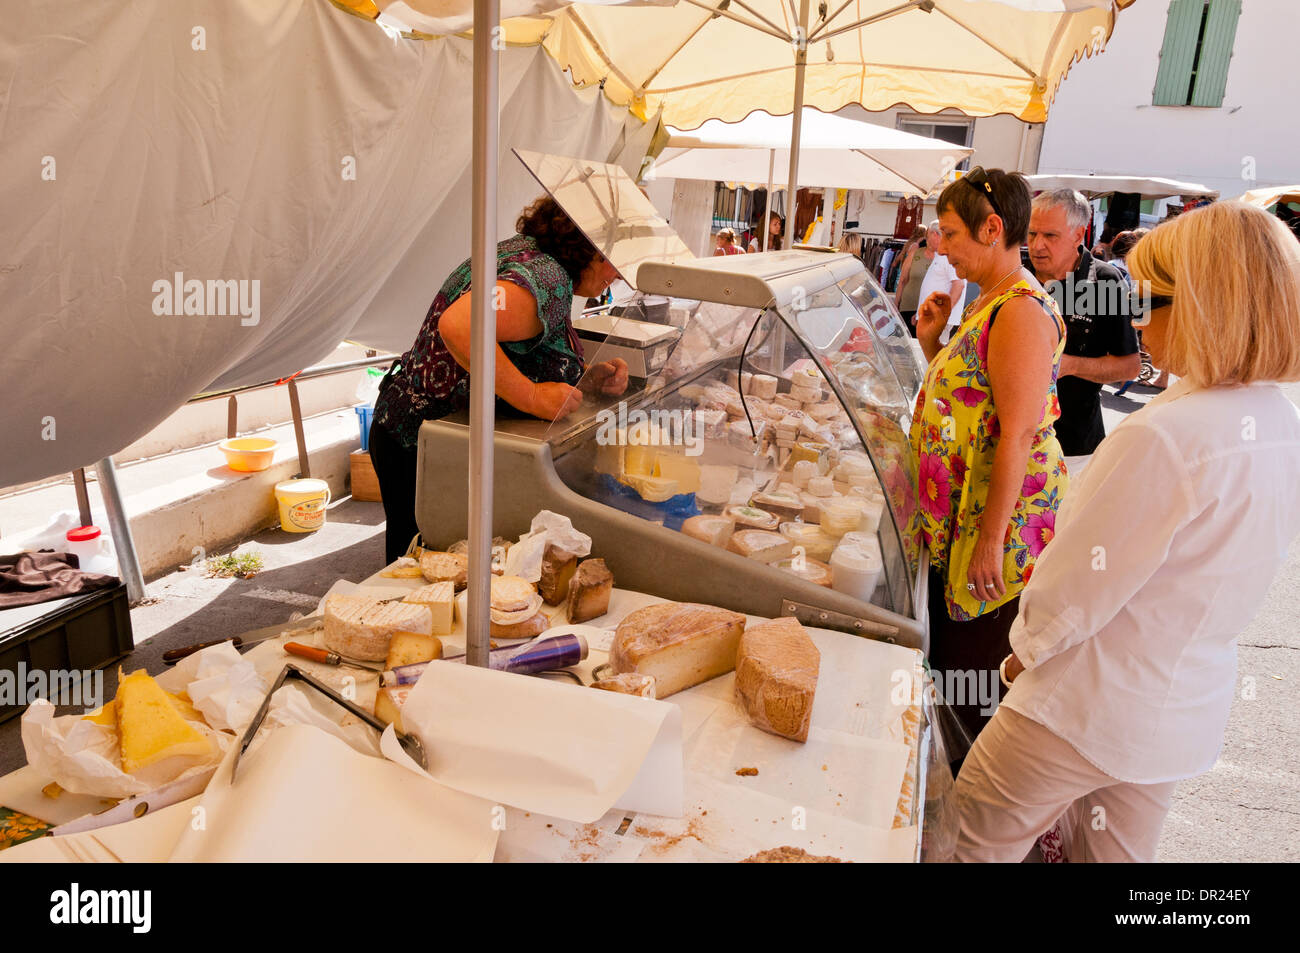 Saturday Outdoor Market in Gignac, Hérault, Languedoc Roussillon, France Stock Photo